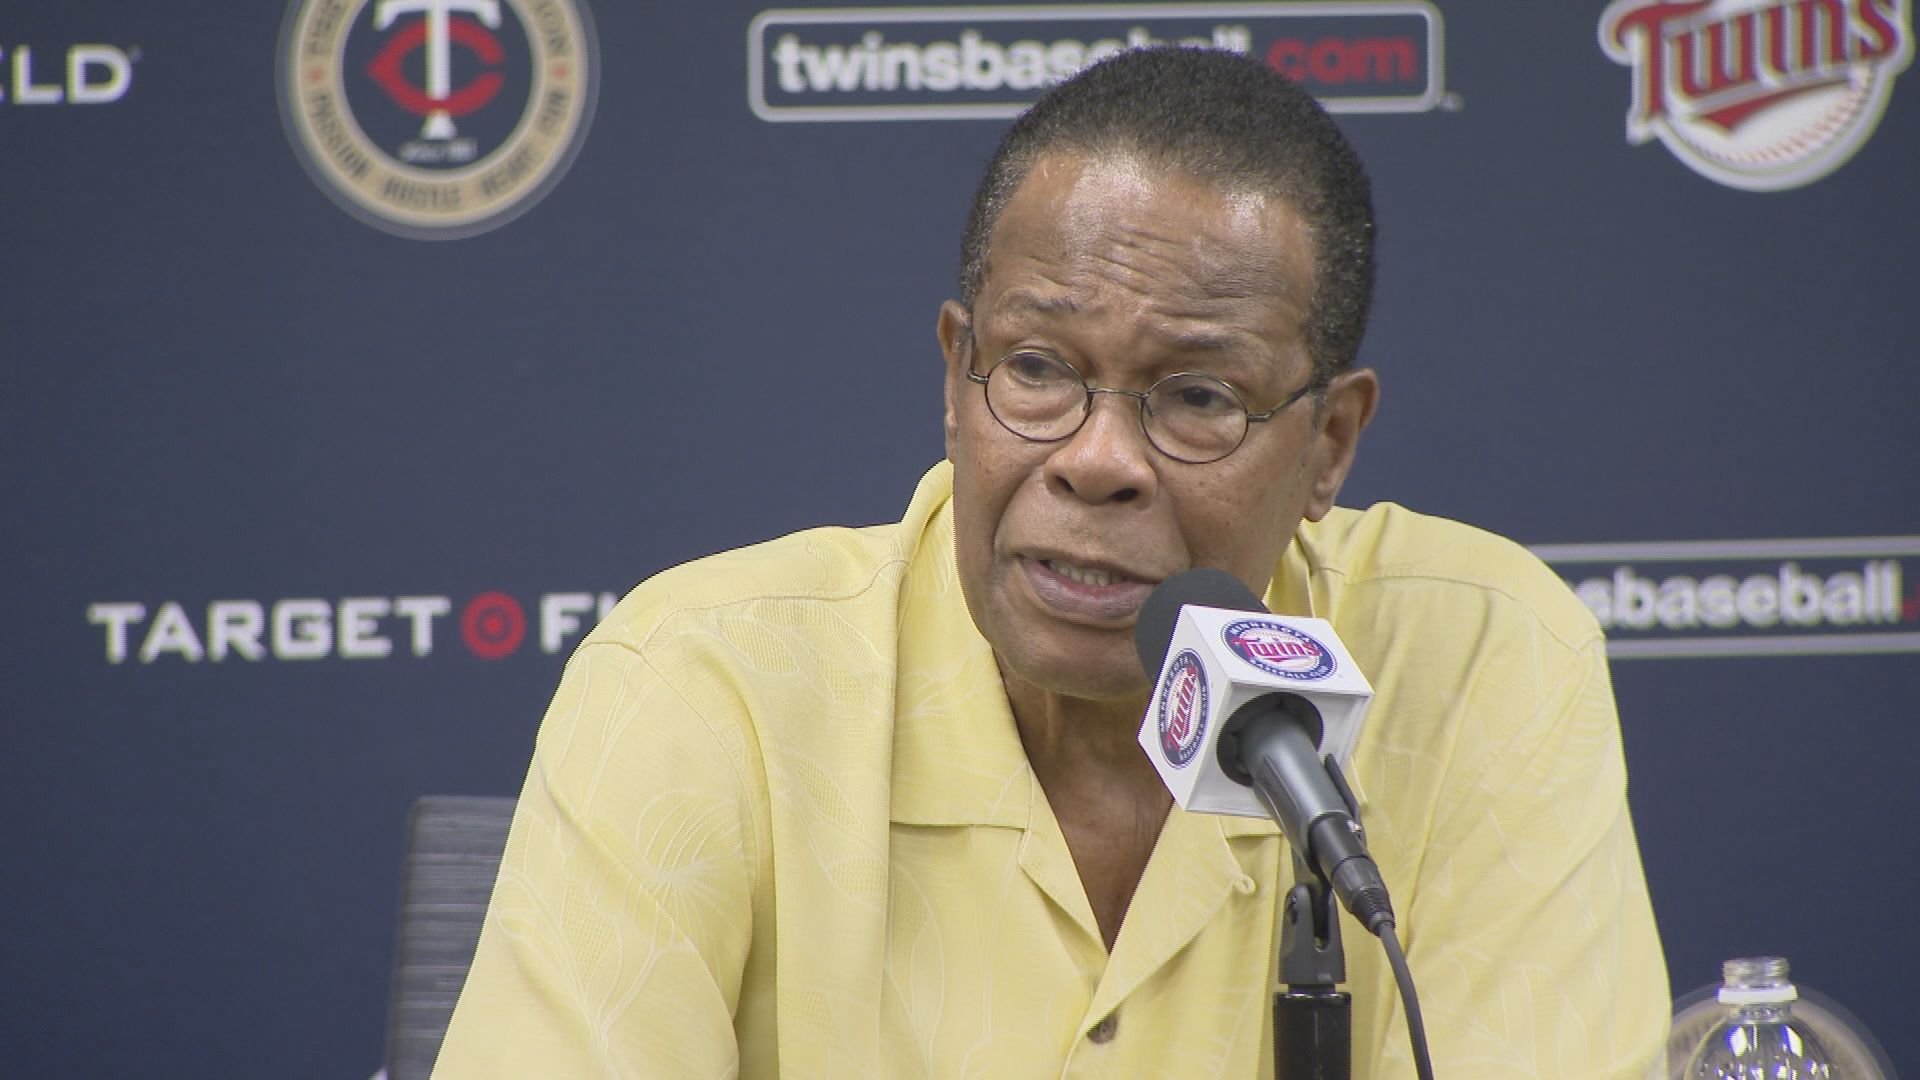 After nearly dying, former Twins star Rod Carew awaits heart transplant